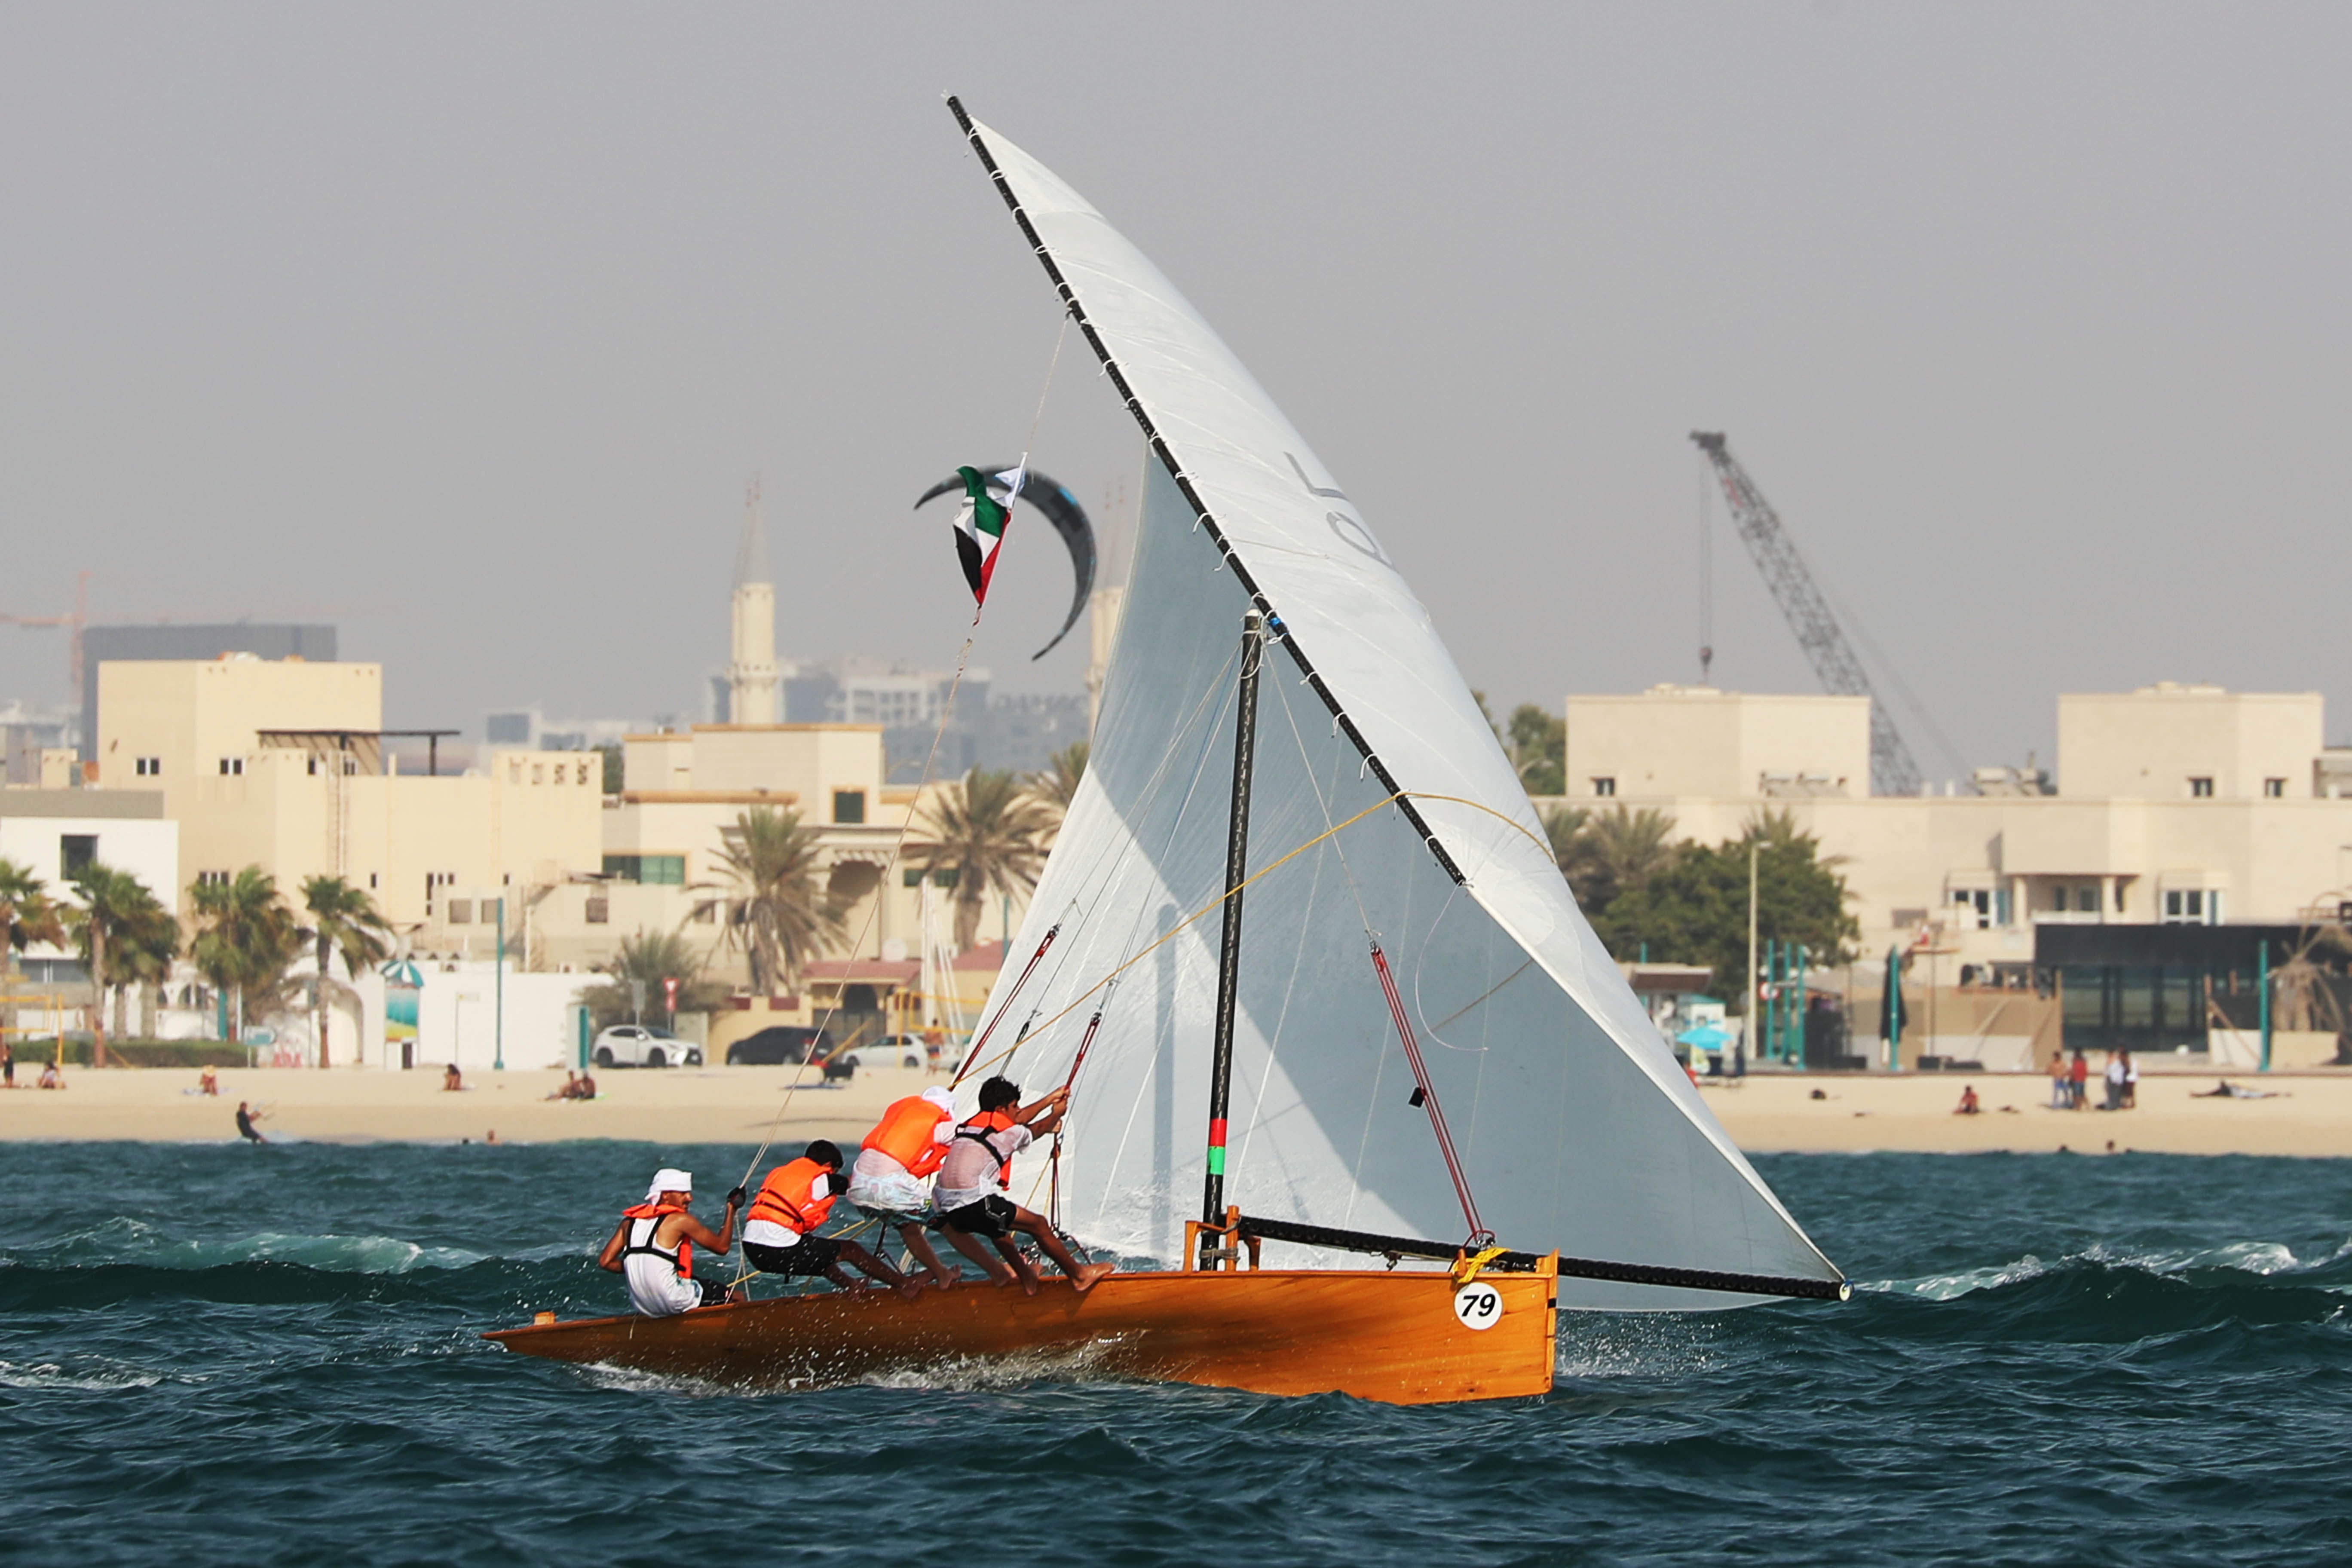 Registration for 22ft Dubai Traditional Dhow Sailing Race closes tomorrow